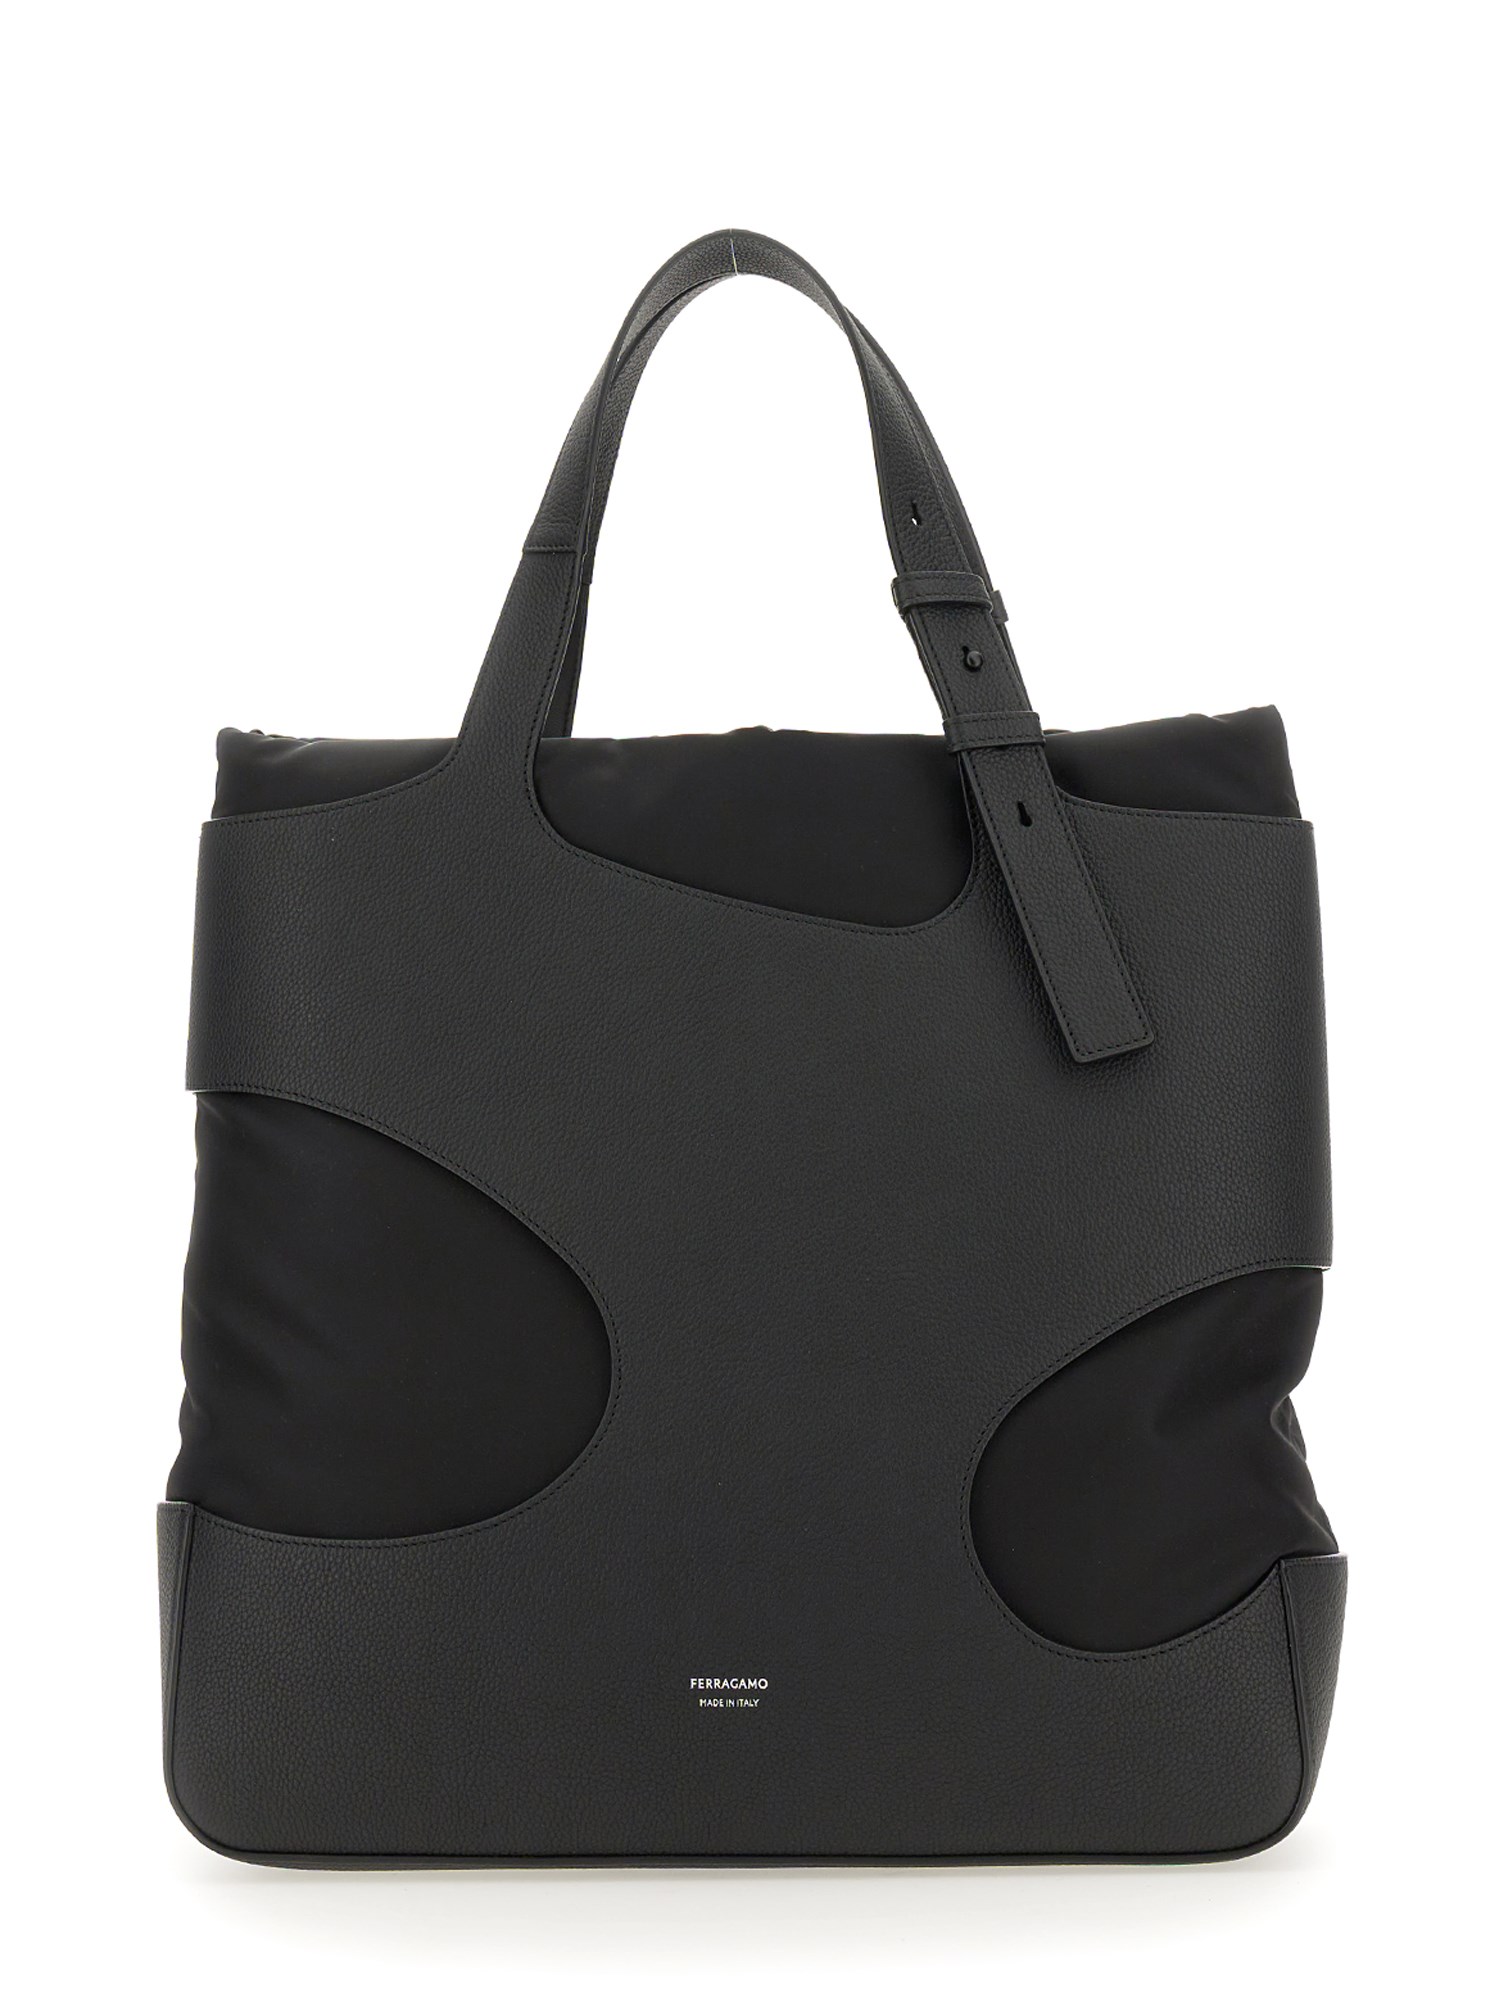 ferragamo tote bag with cut out